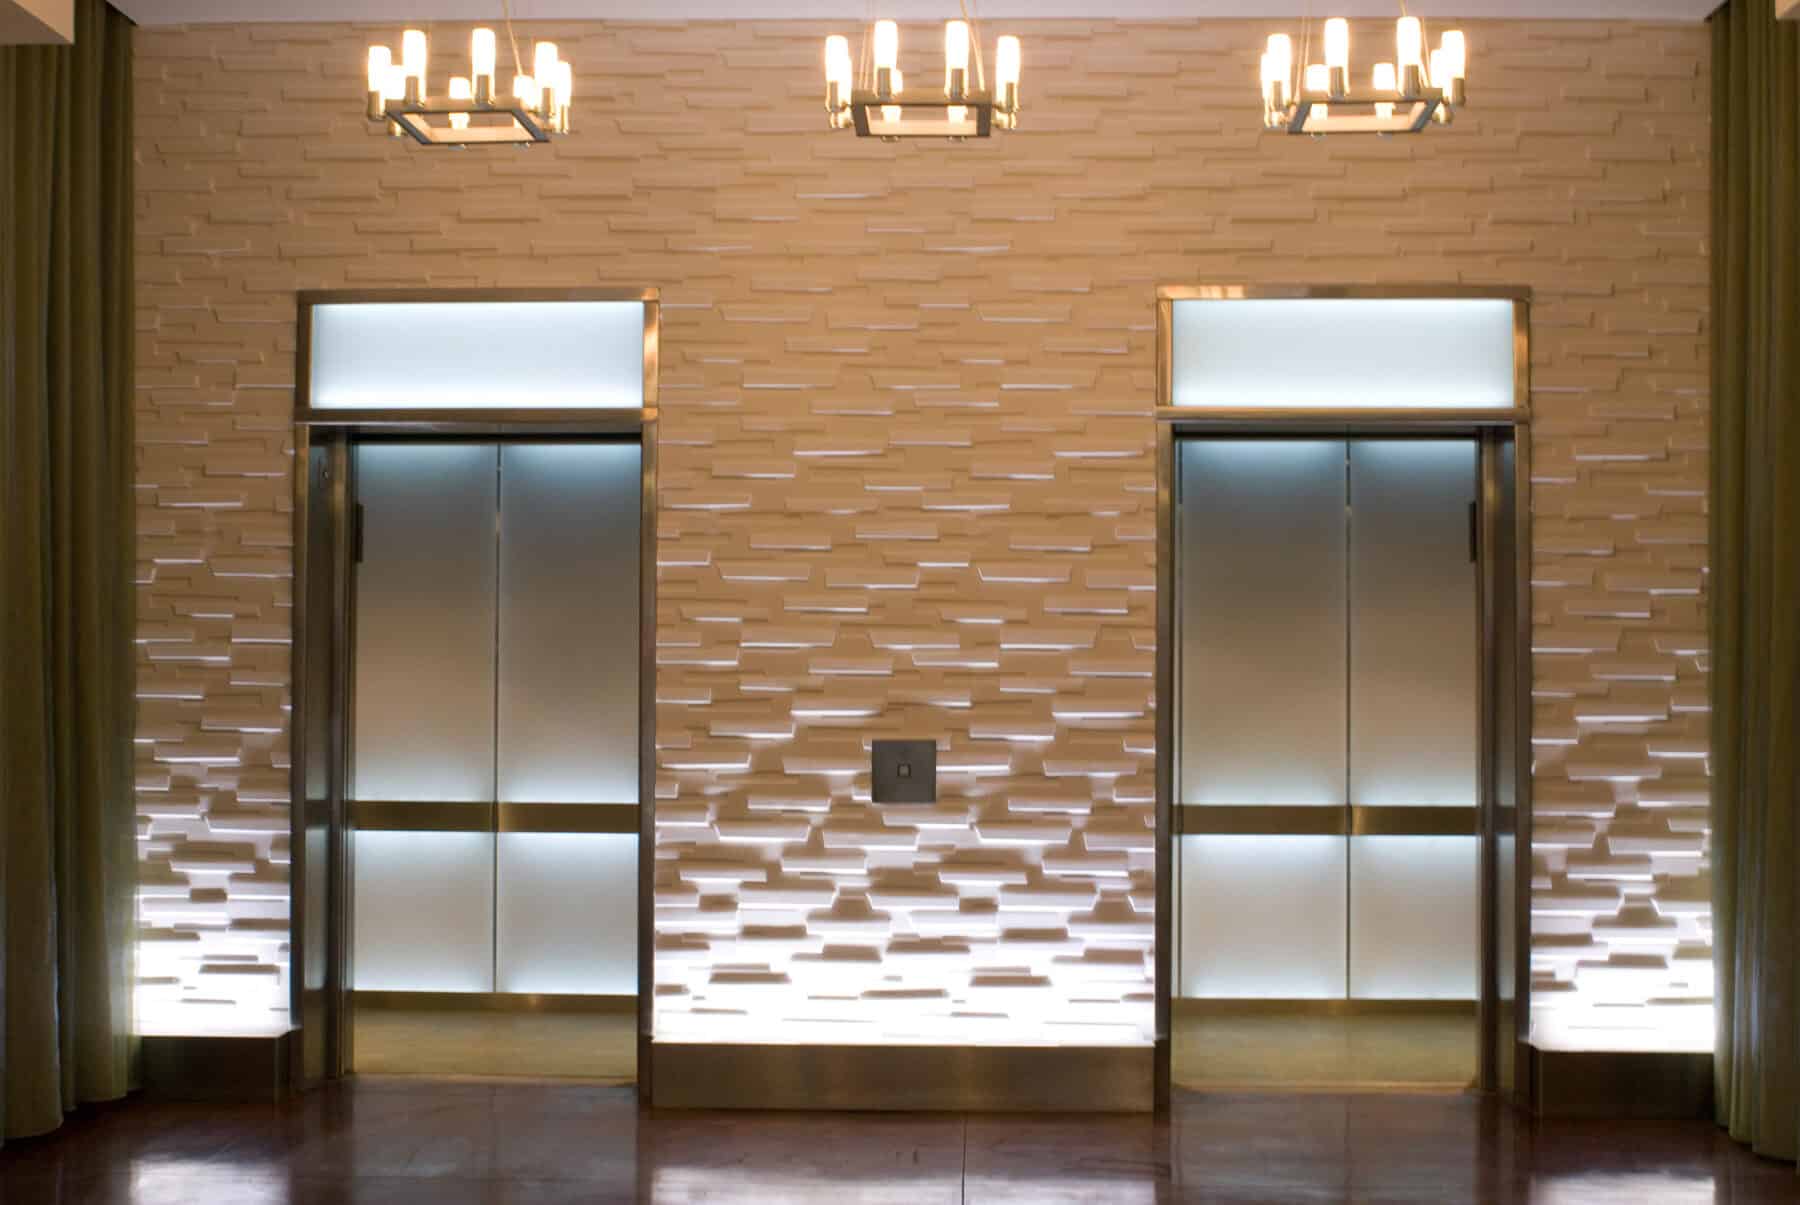 Custom Elevators with Back lit Glass for West Jackson Lobby Remodel by Commercial Builder & General Contractor Structural Enterprises